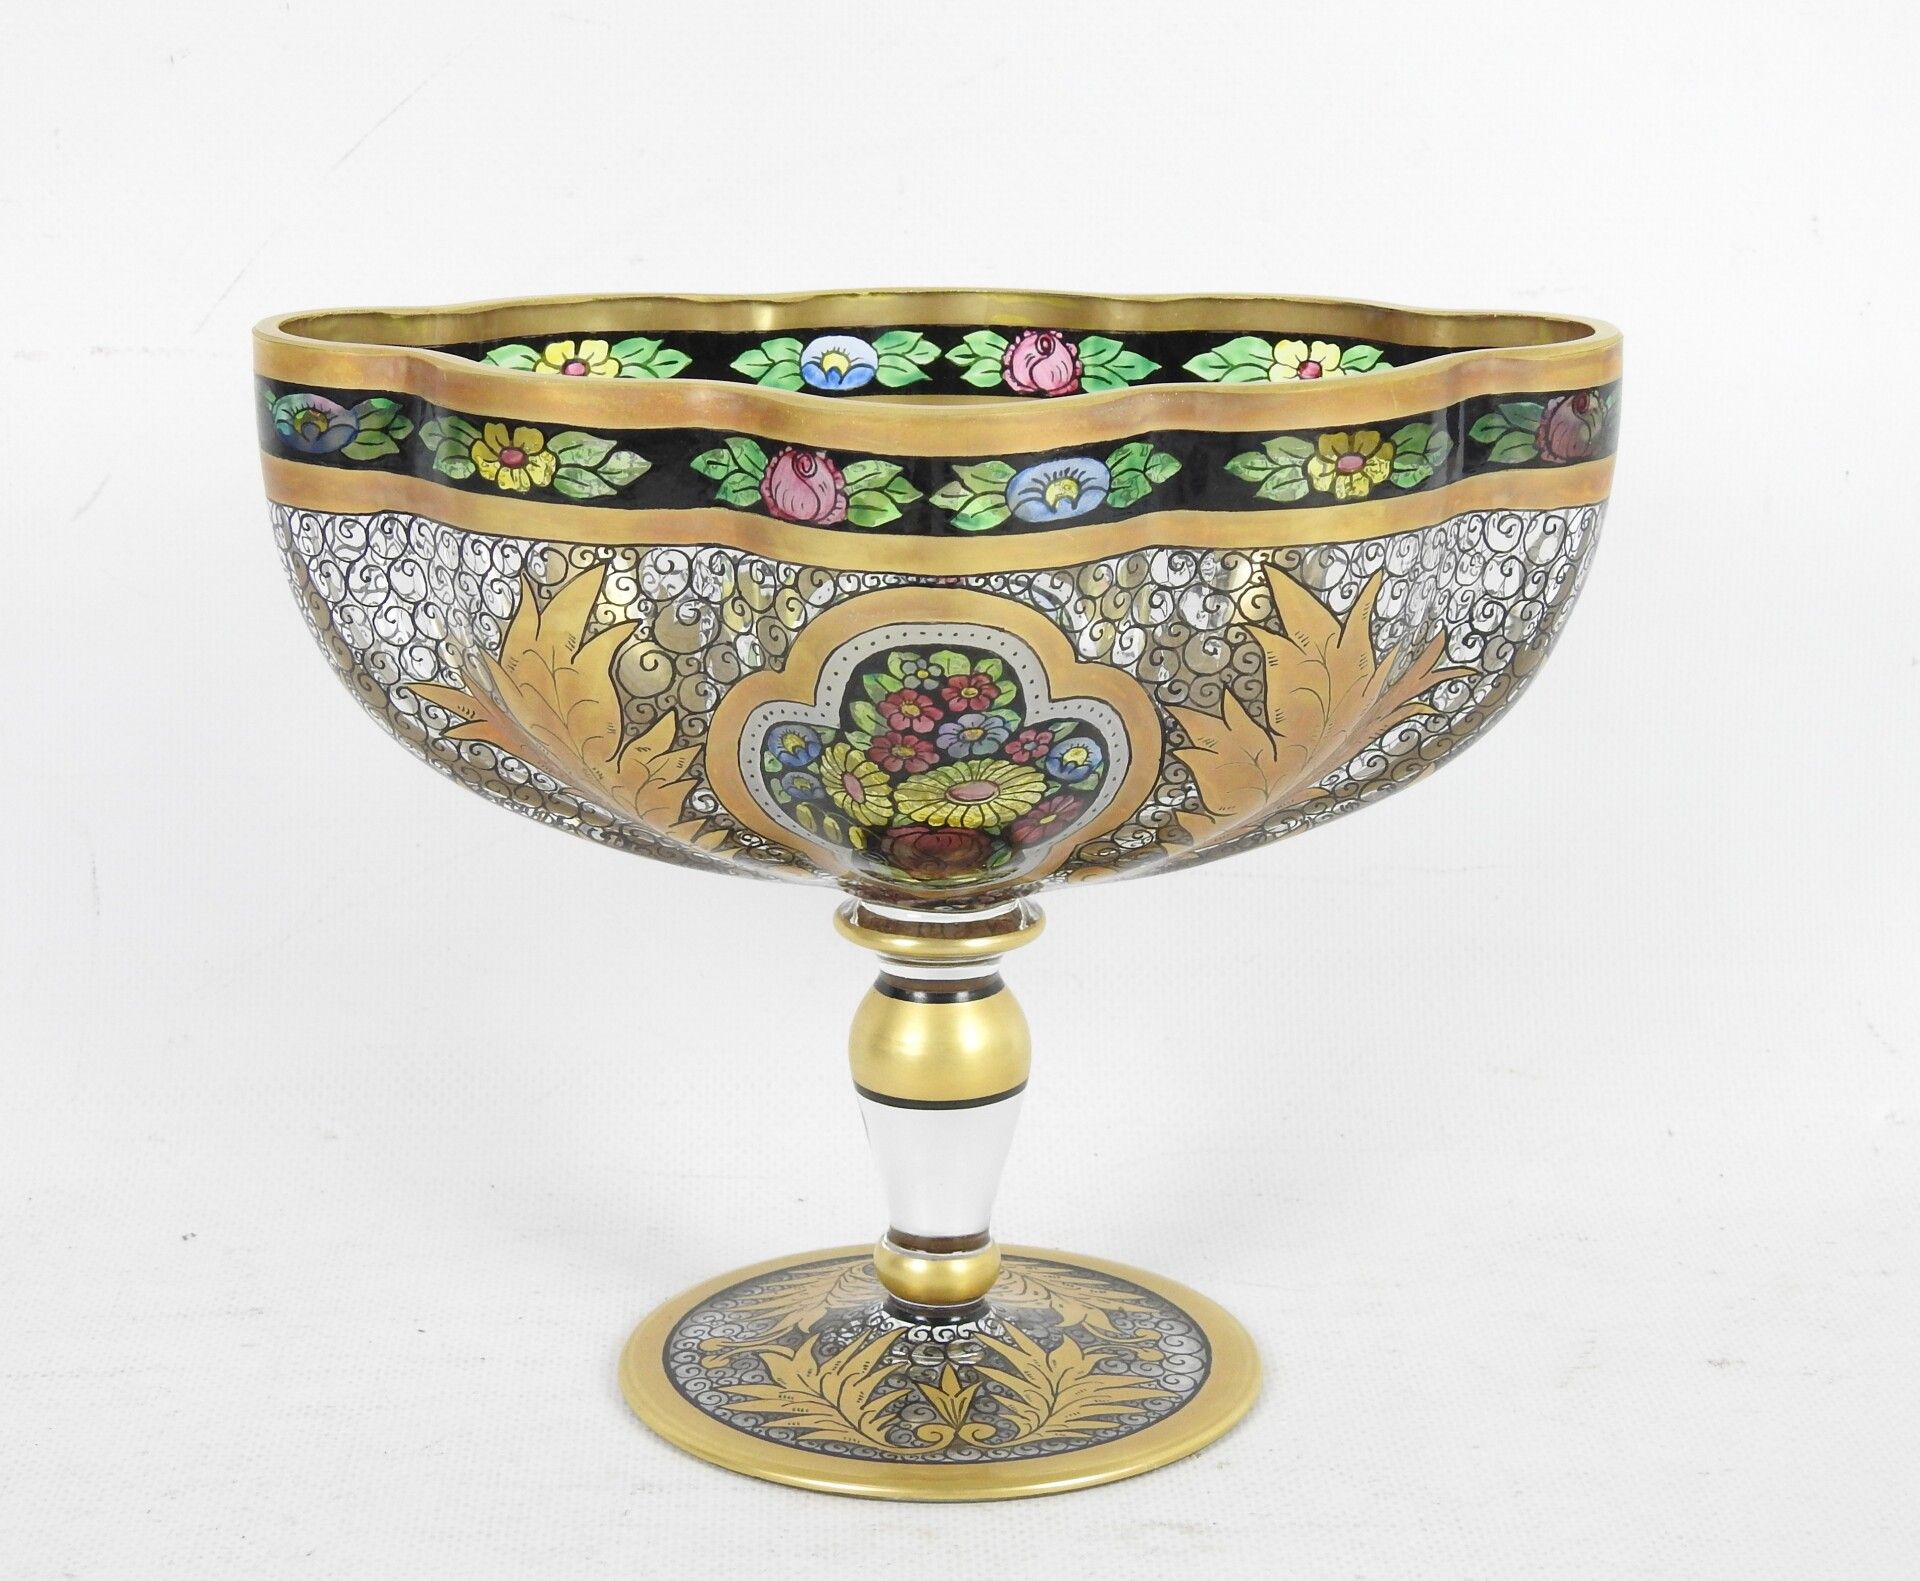 Null SVOBODA: A glass bowl on foot, oblong shape with wavy edges, decorated with&hellip;